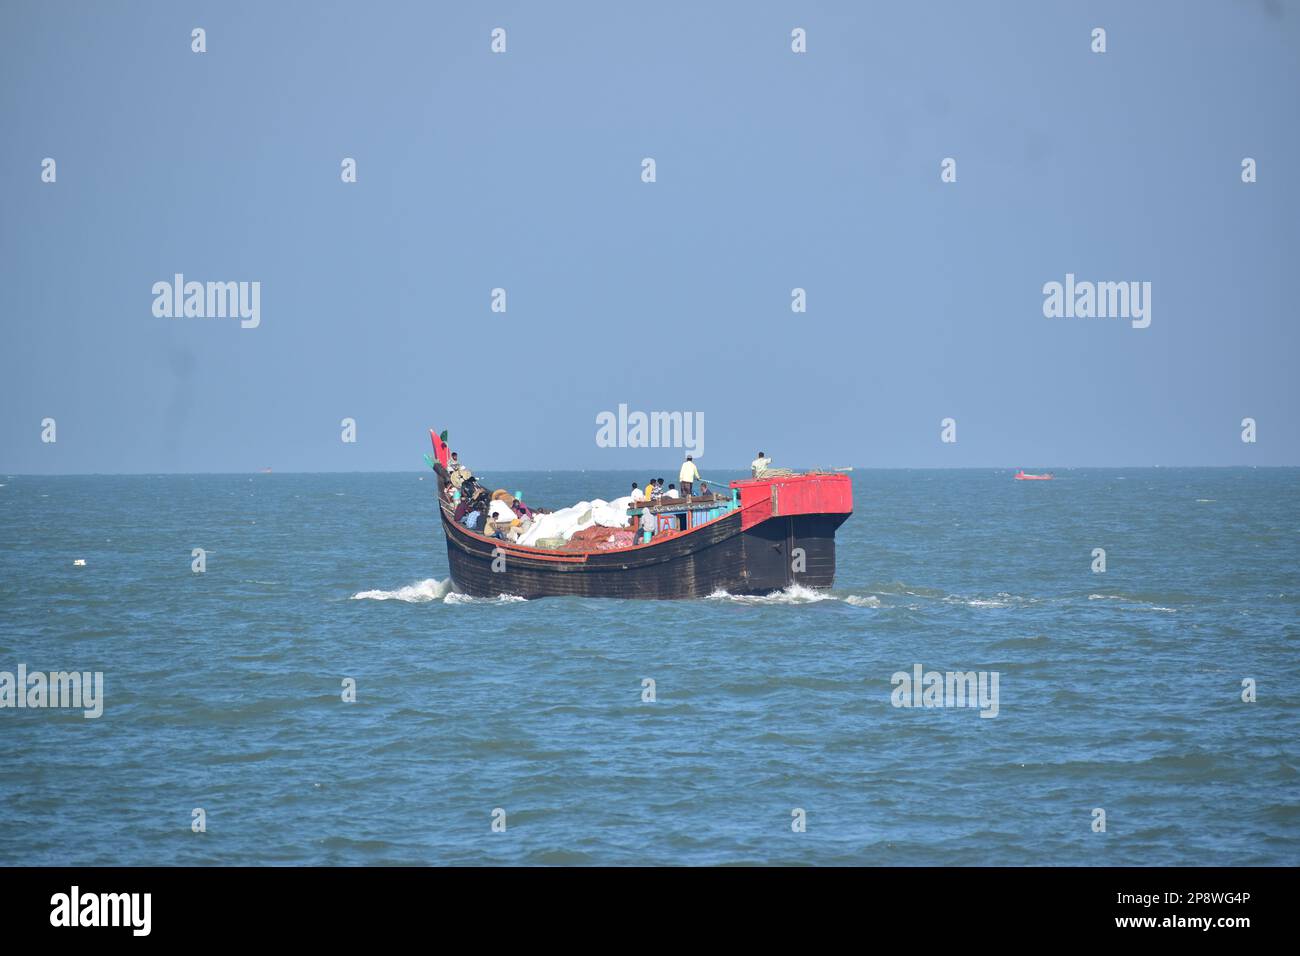 This is a cargo boat of sandwip. this boats is used regular in CTG to Sandwip route for transfer anything. Stock Photo